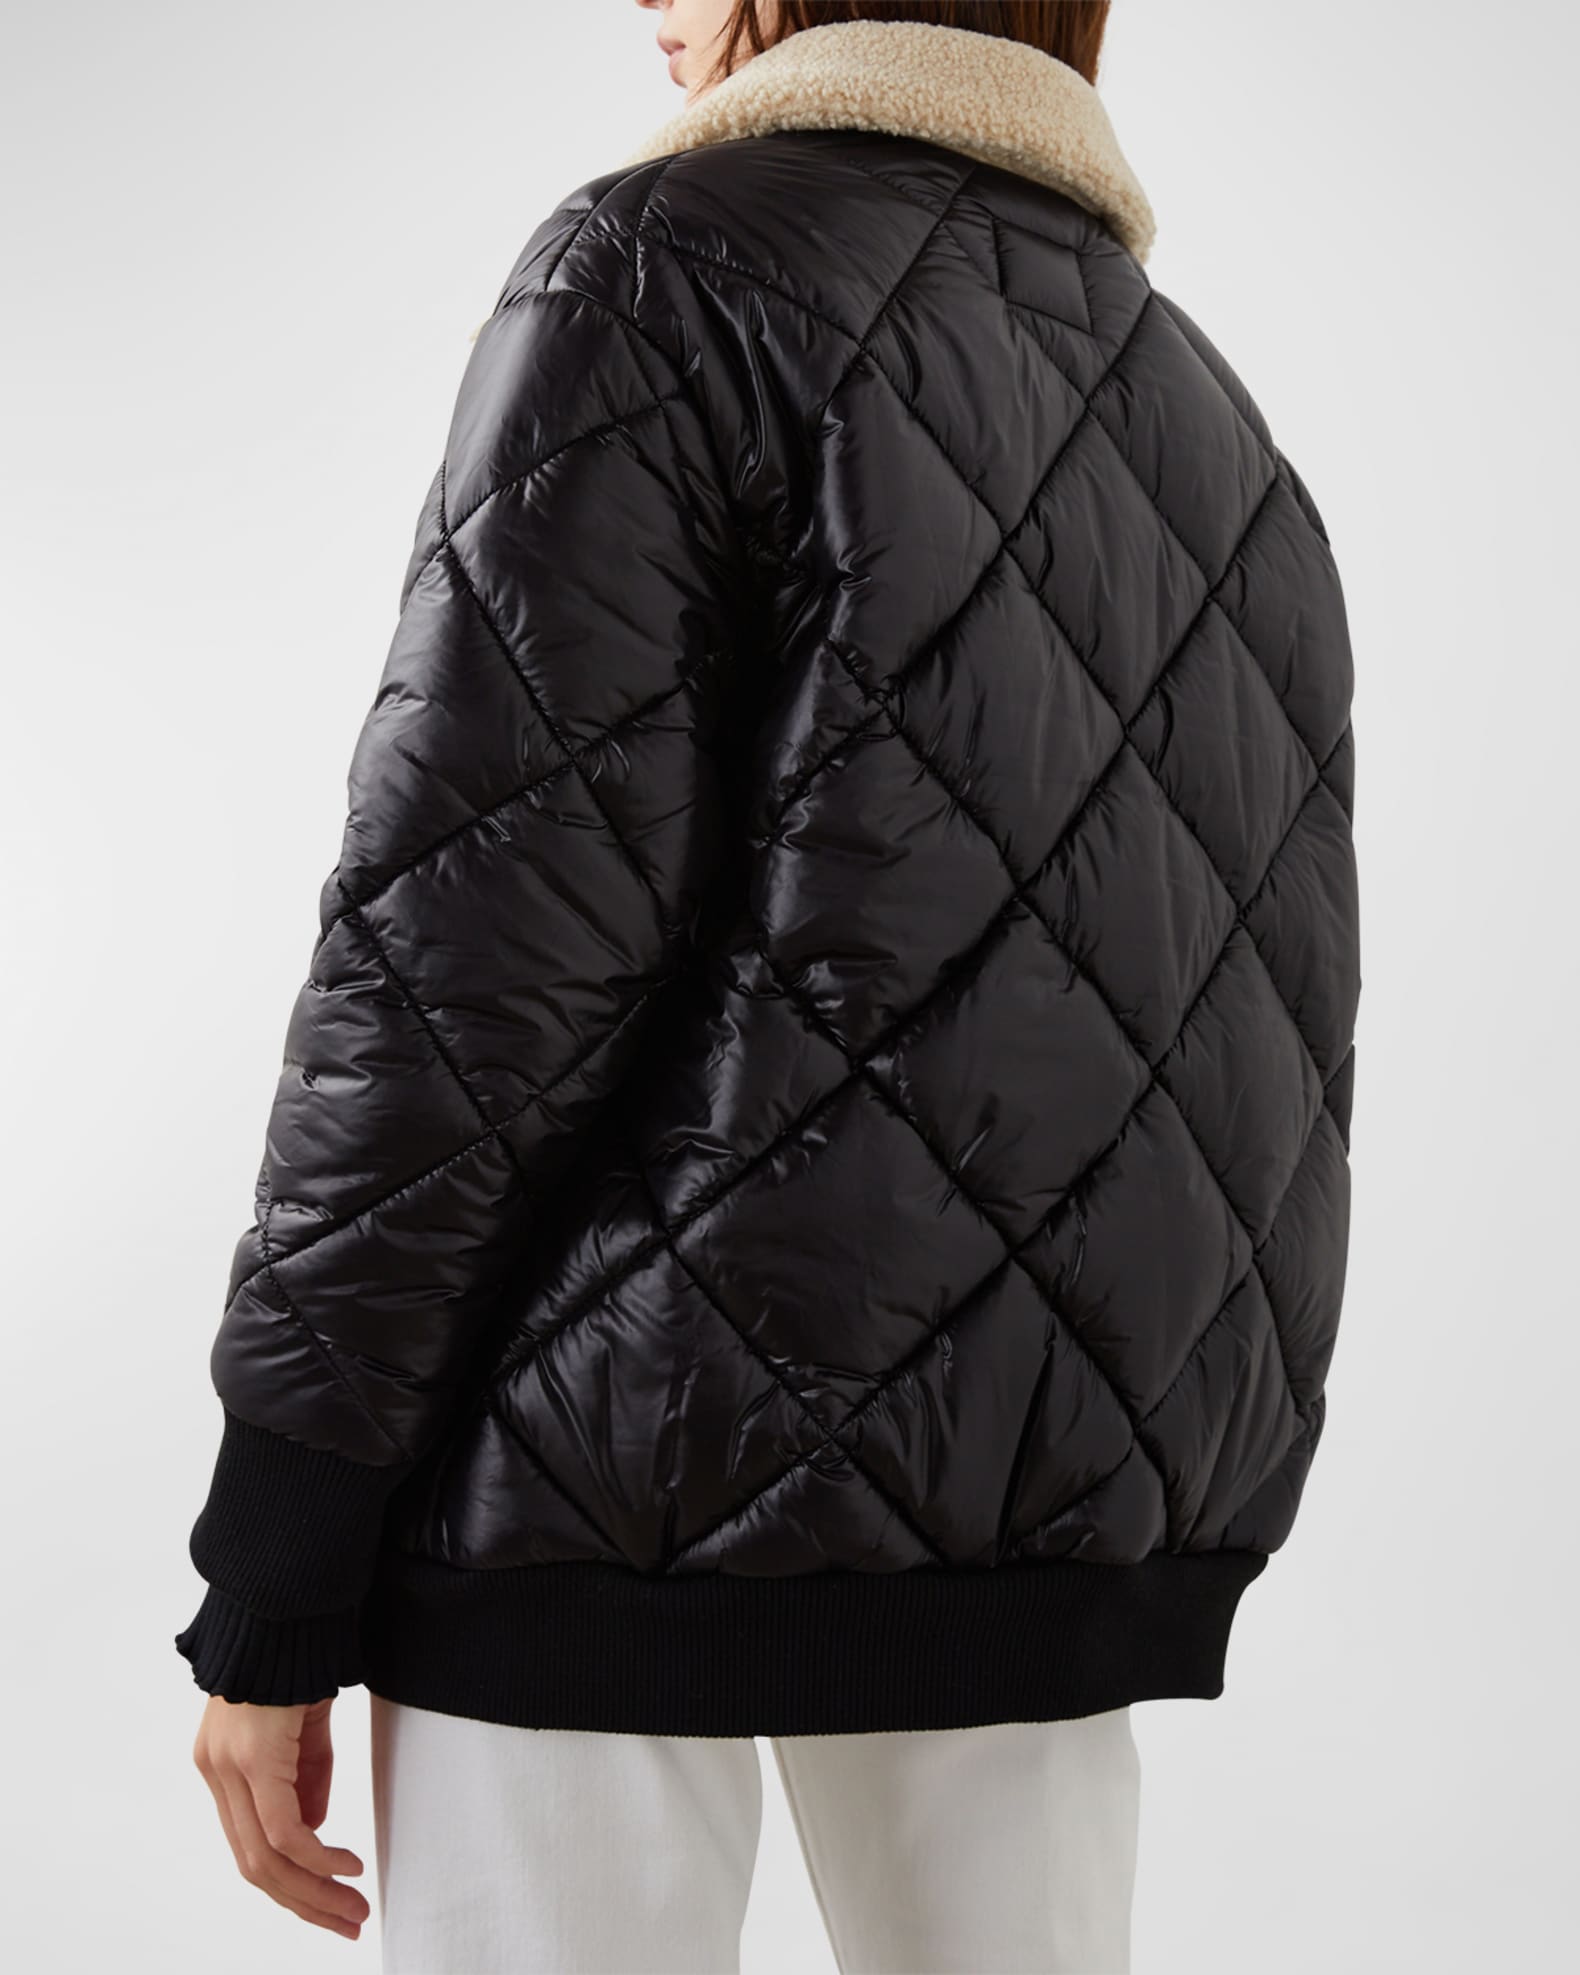 Rails Shay Diamond-Quilted Jacket | Neiman Marcus